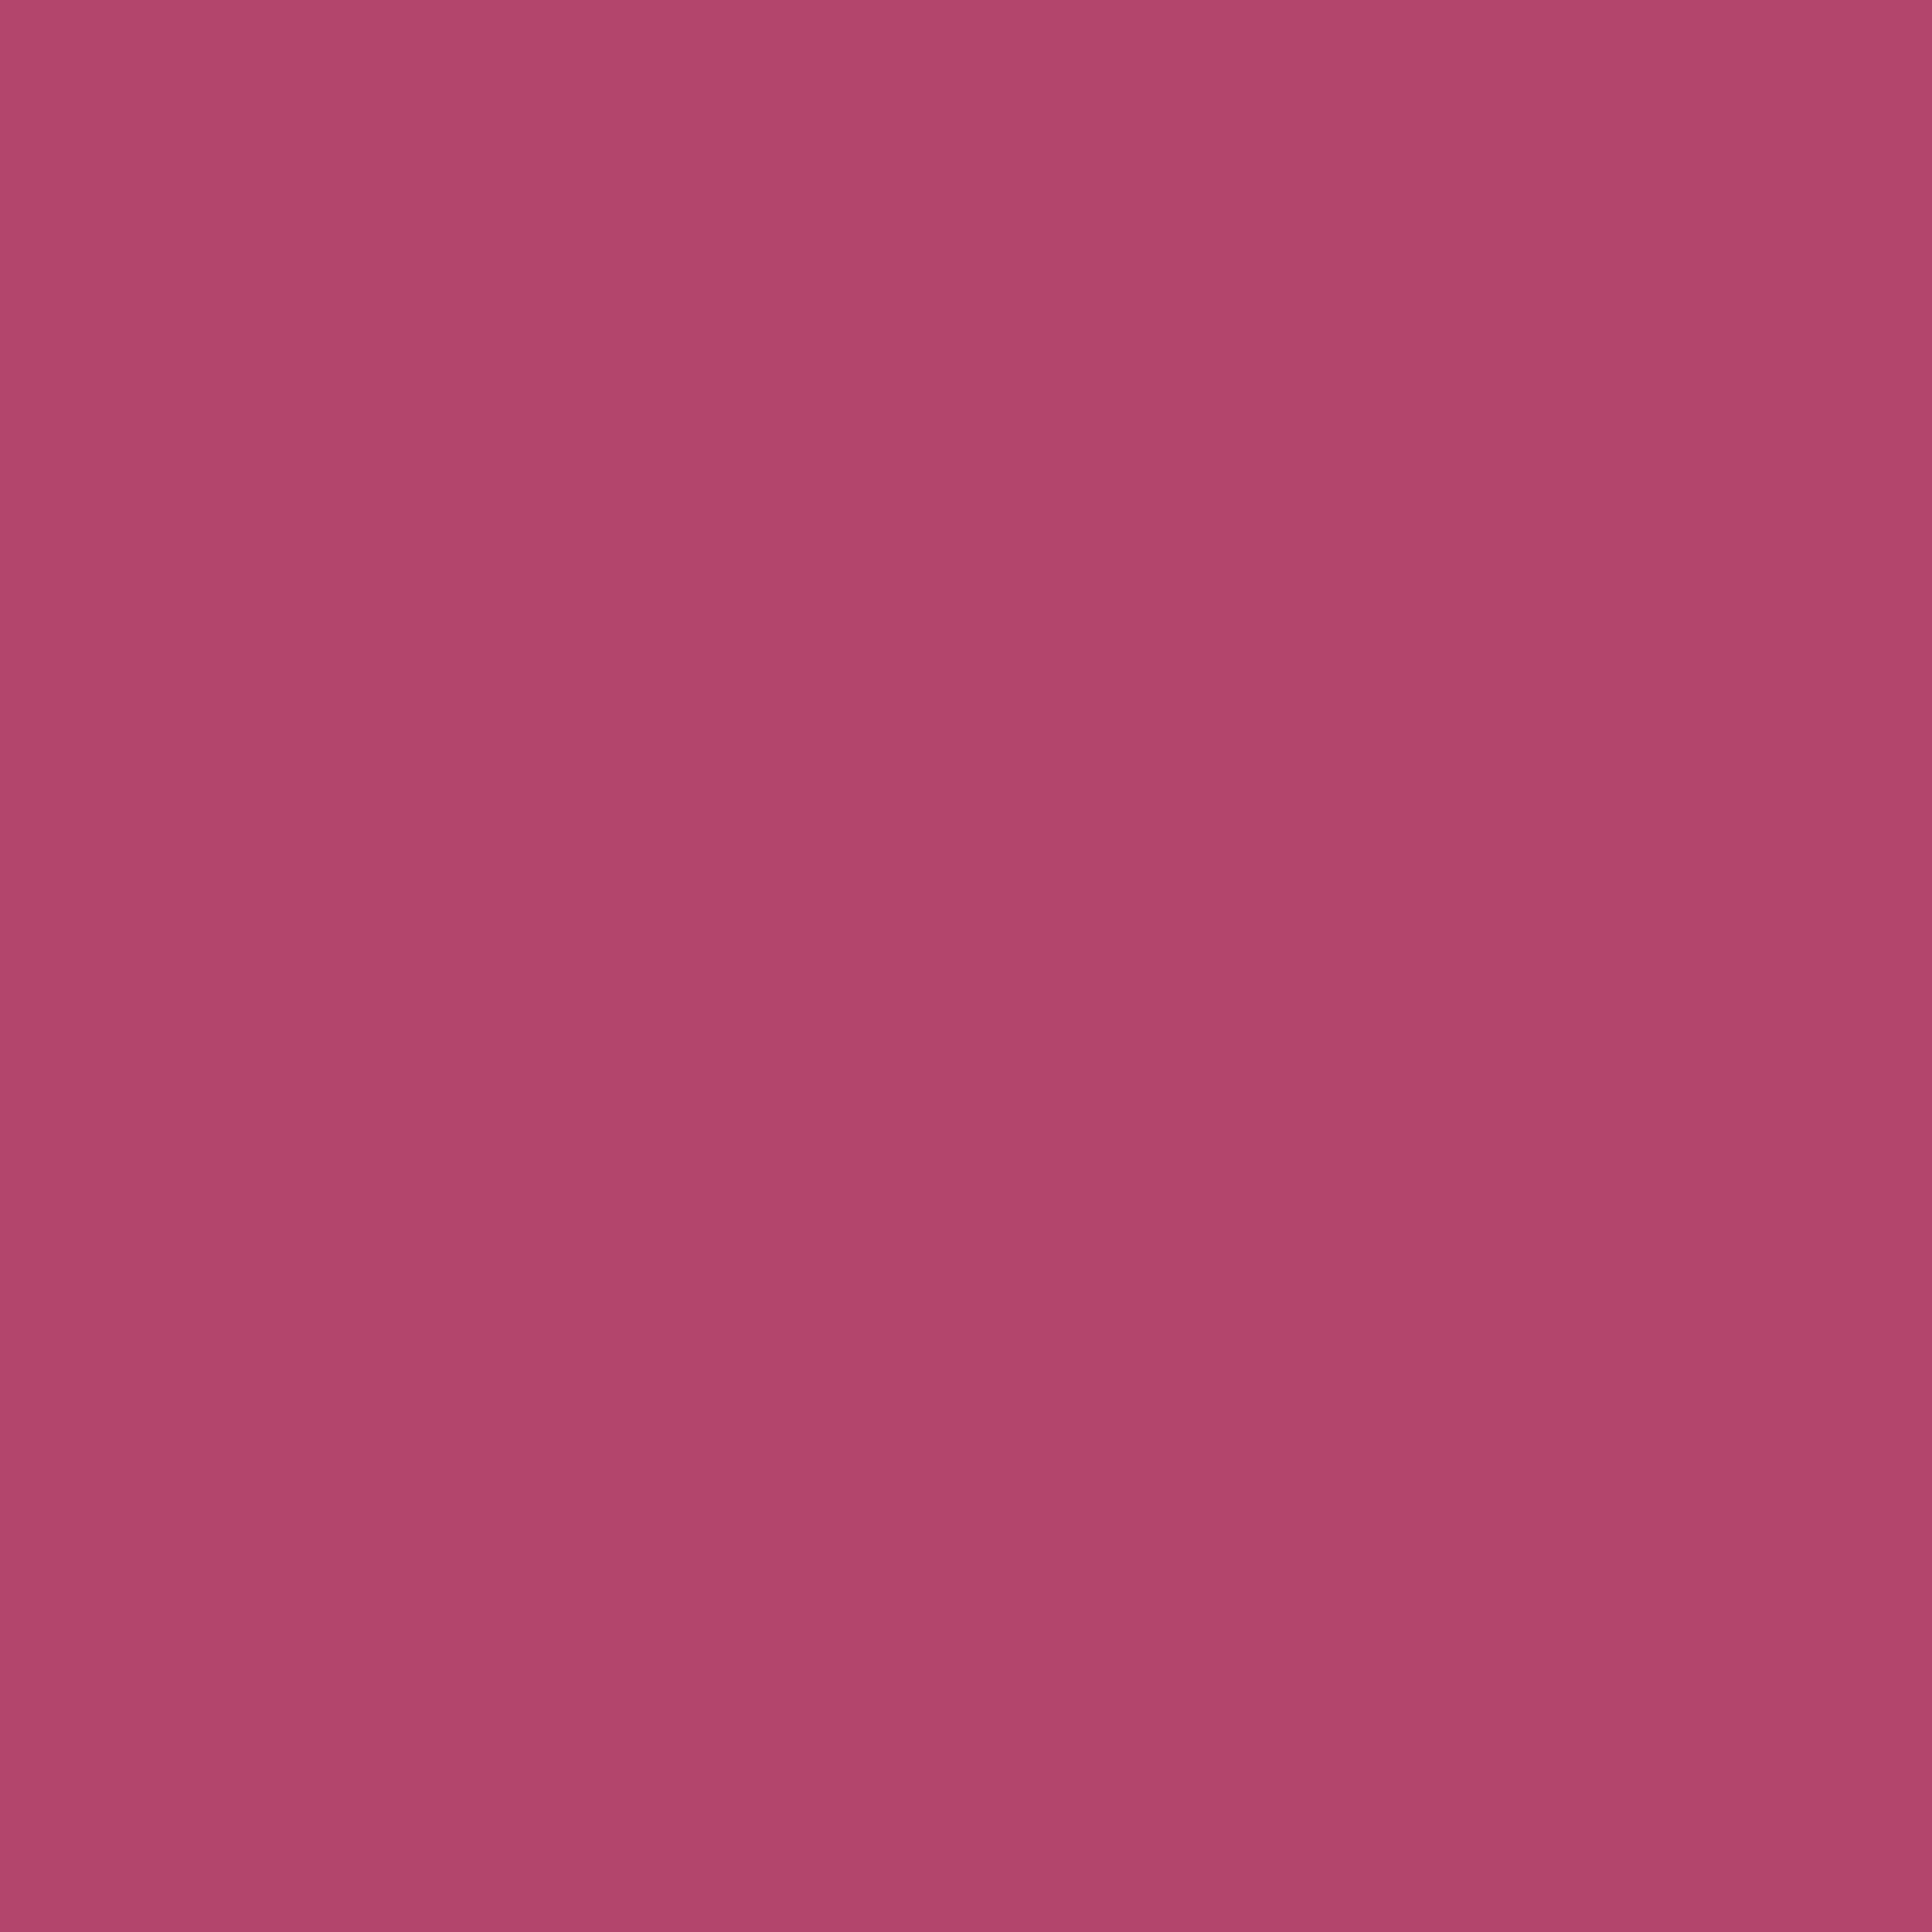 2732x2732 Raspberry Rose Solid Color Background